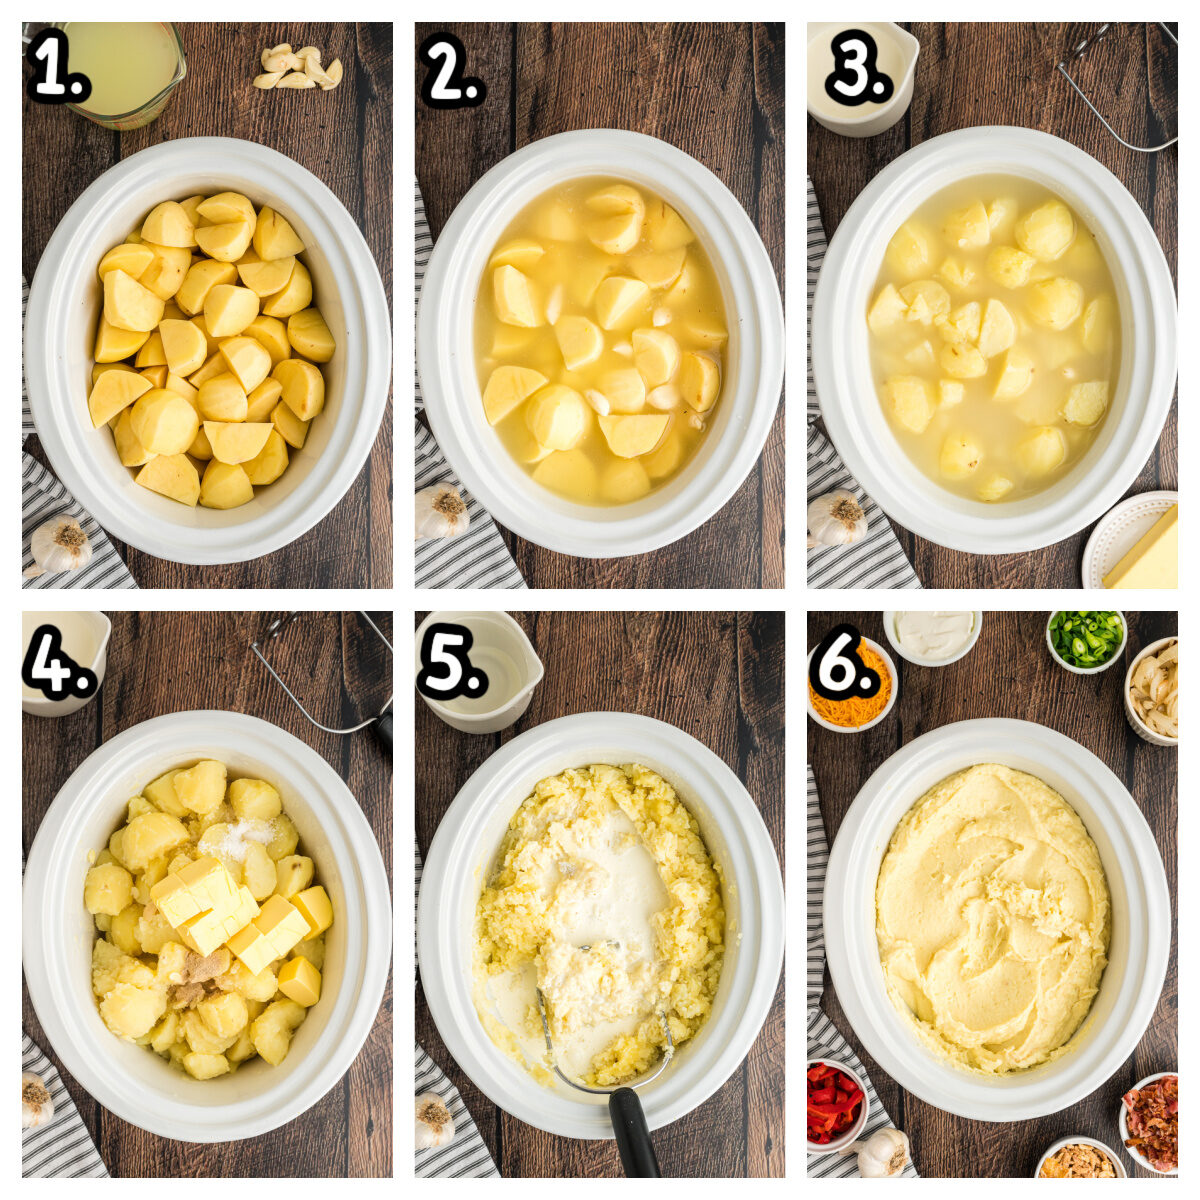 6 images showing how to make mashed potatoes in a slow cooker.